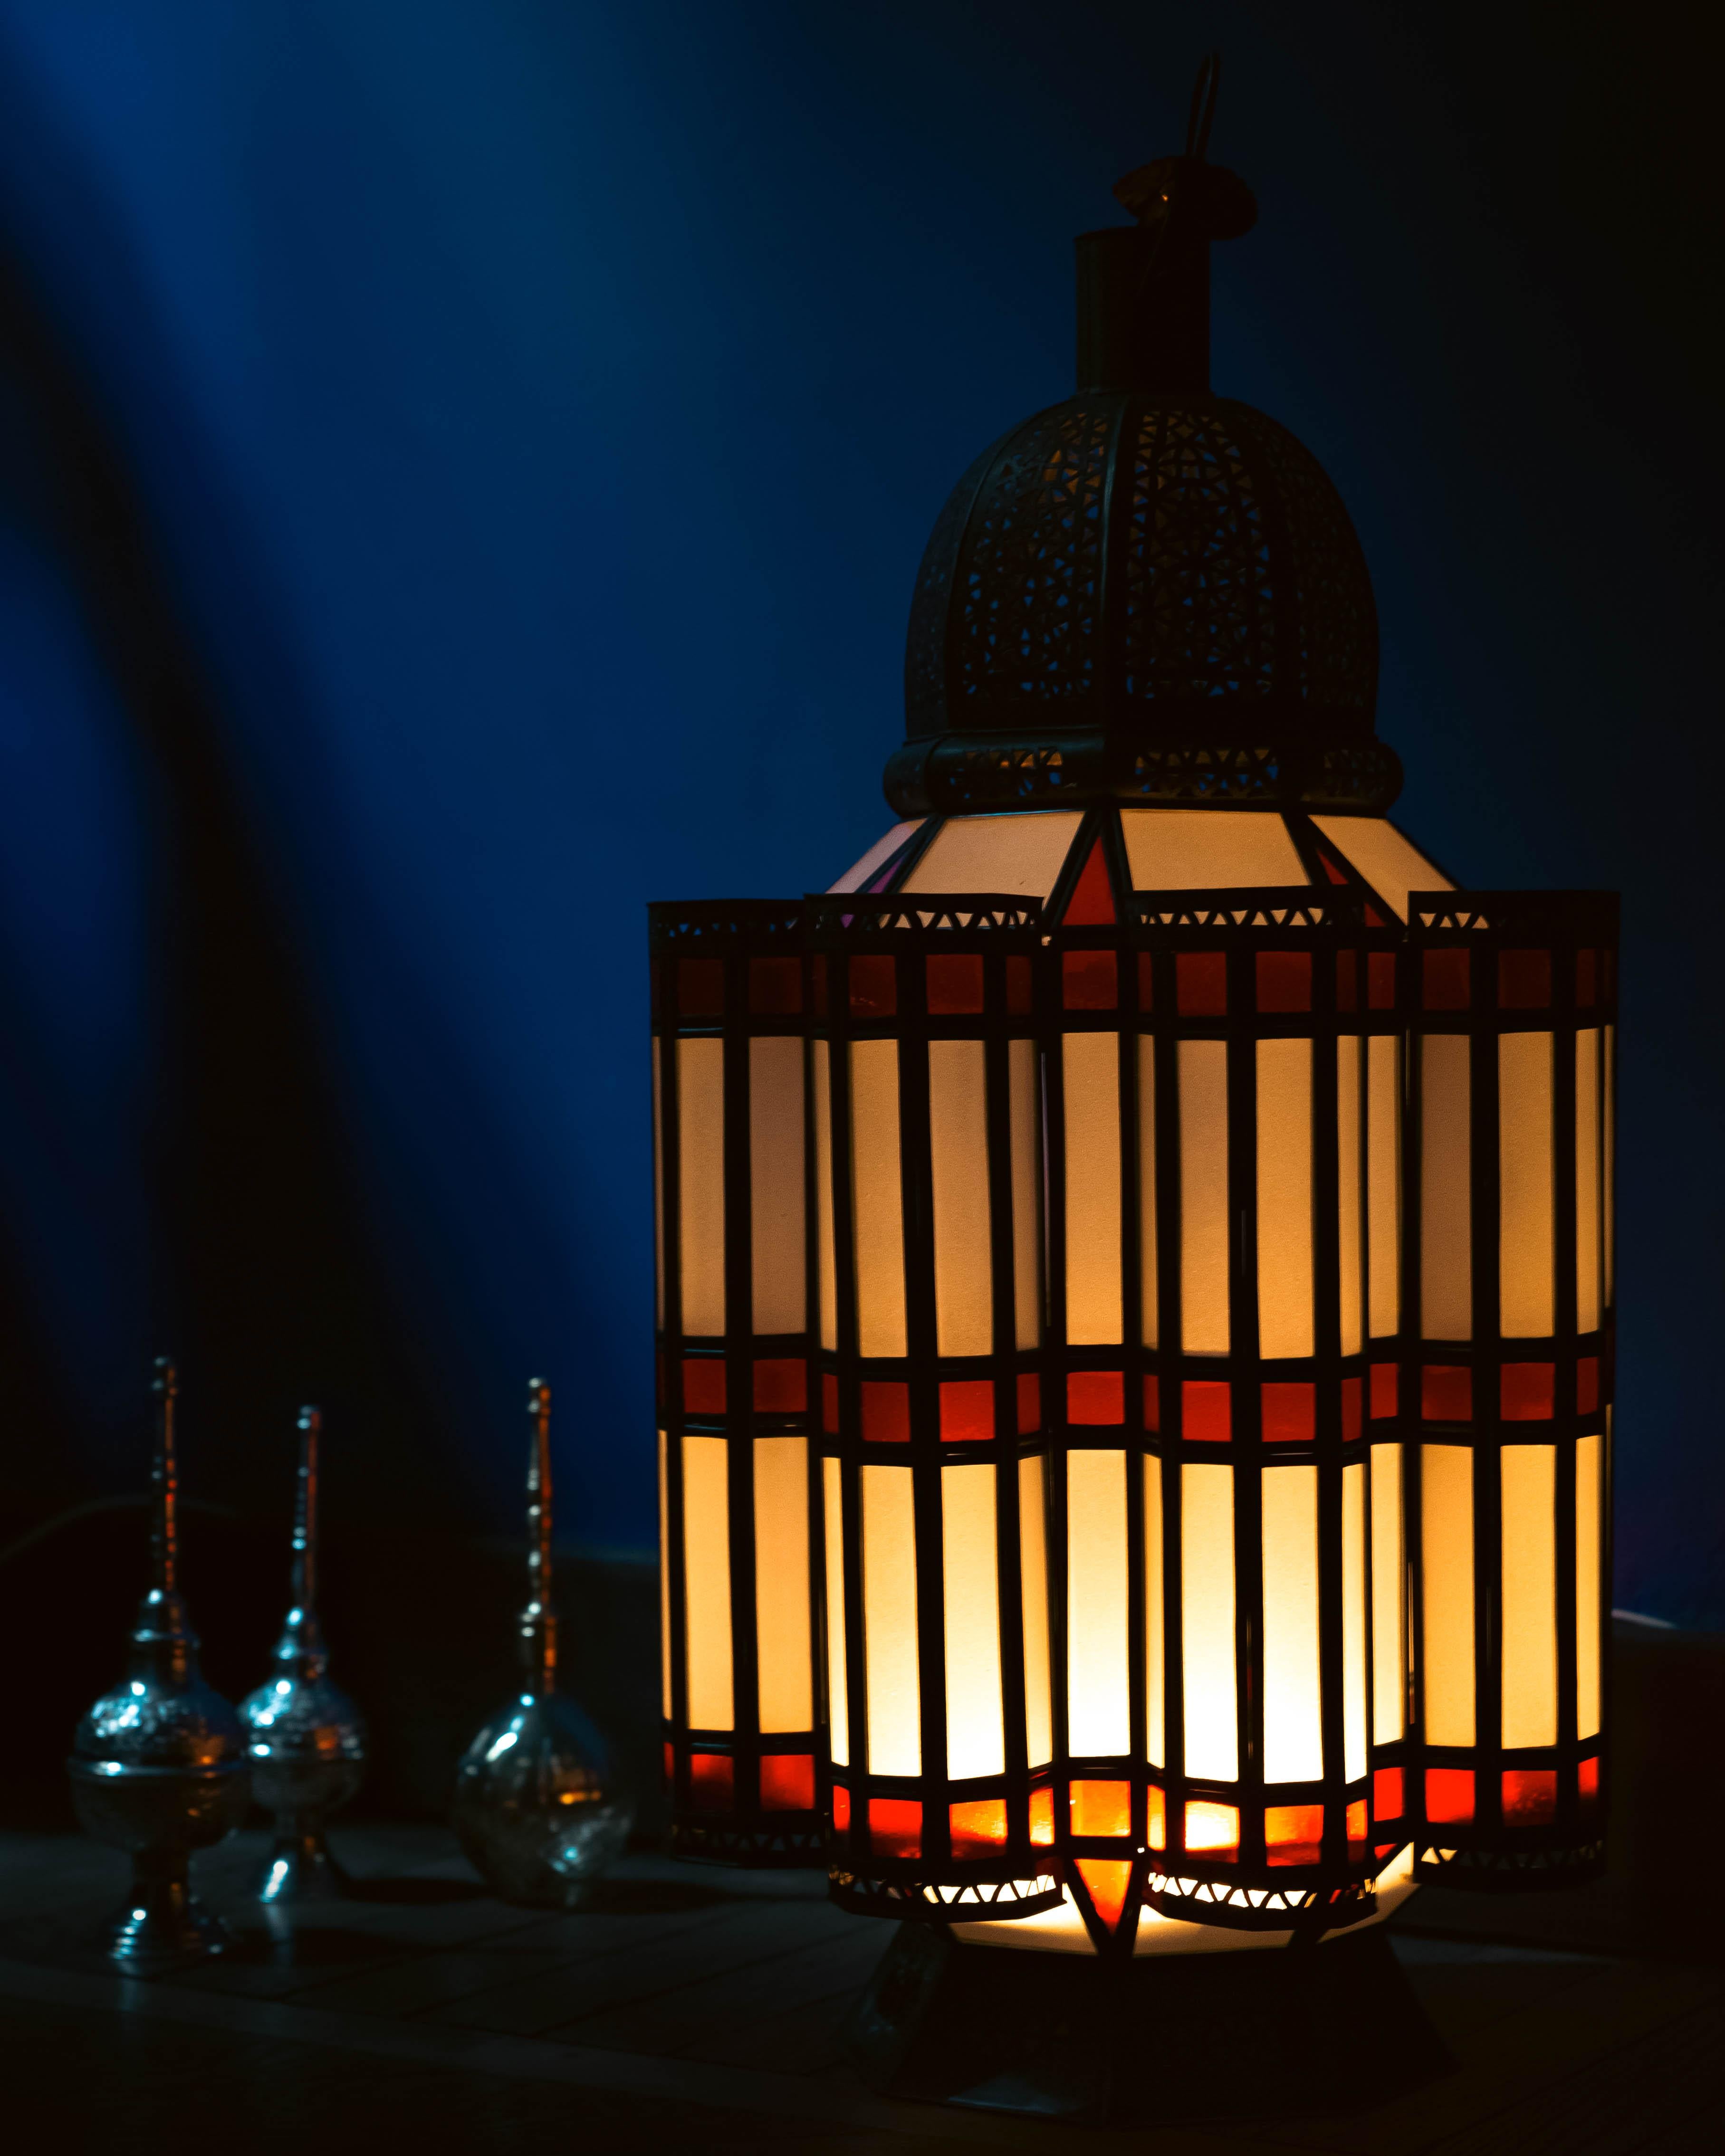 Marrakech lamp - Mixed Media Art by Unknown